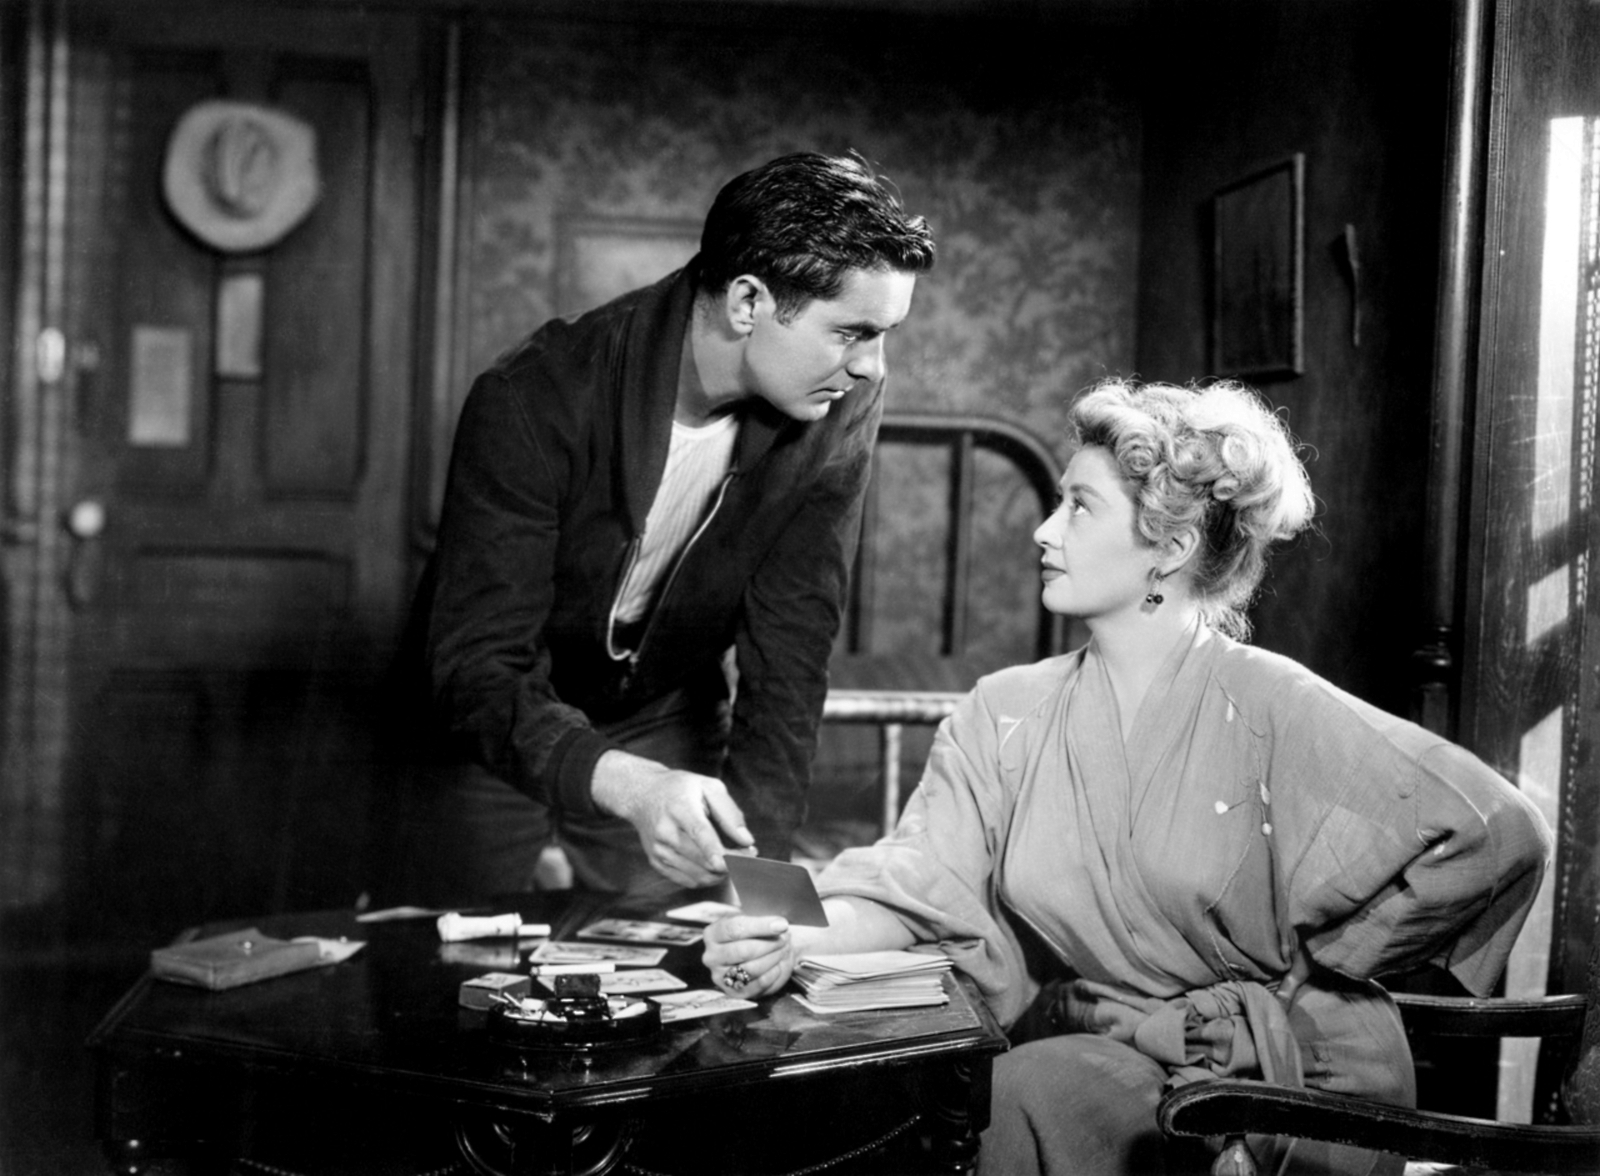 A still image from the film "Nightmare Alley" with a standing man and a seated woman